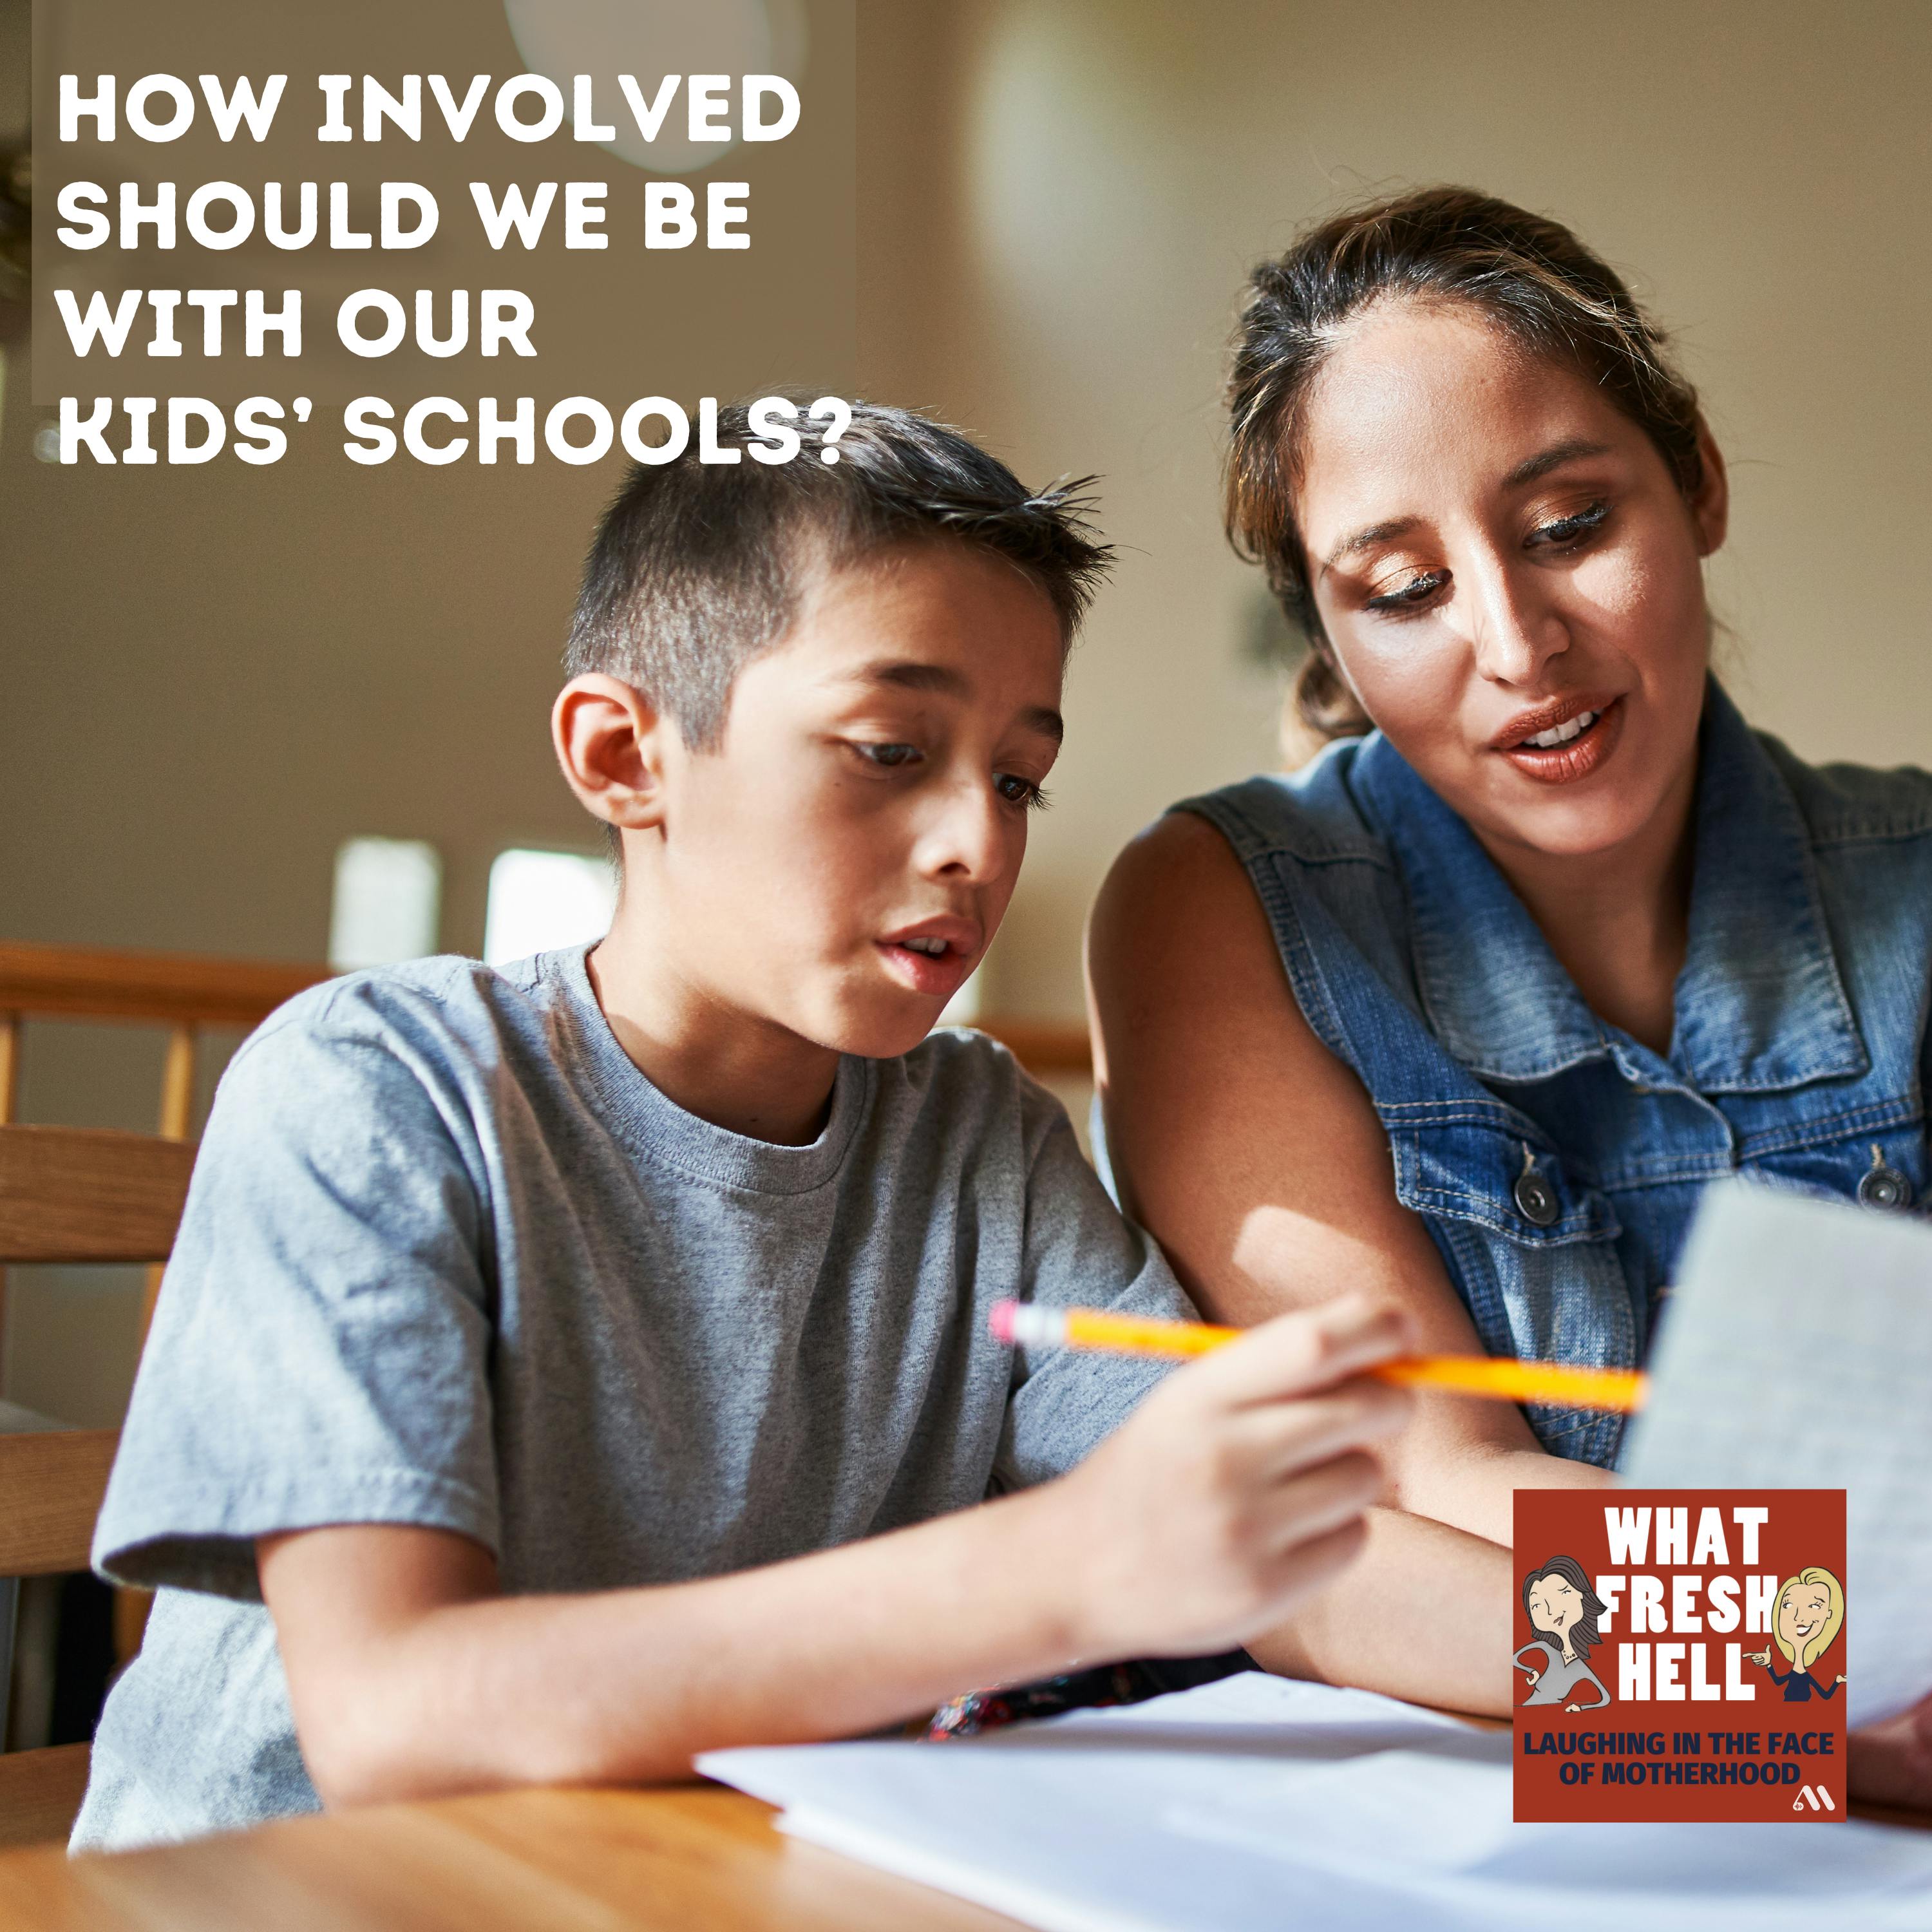 How Involved Should We Be with Our Kids’ Schools?